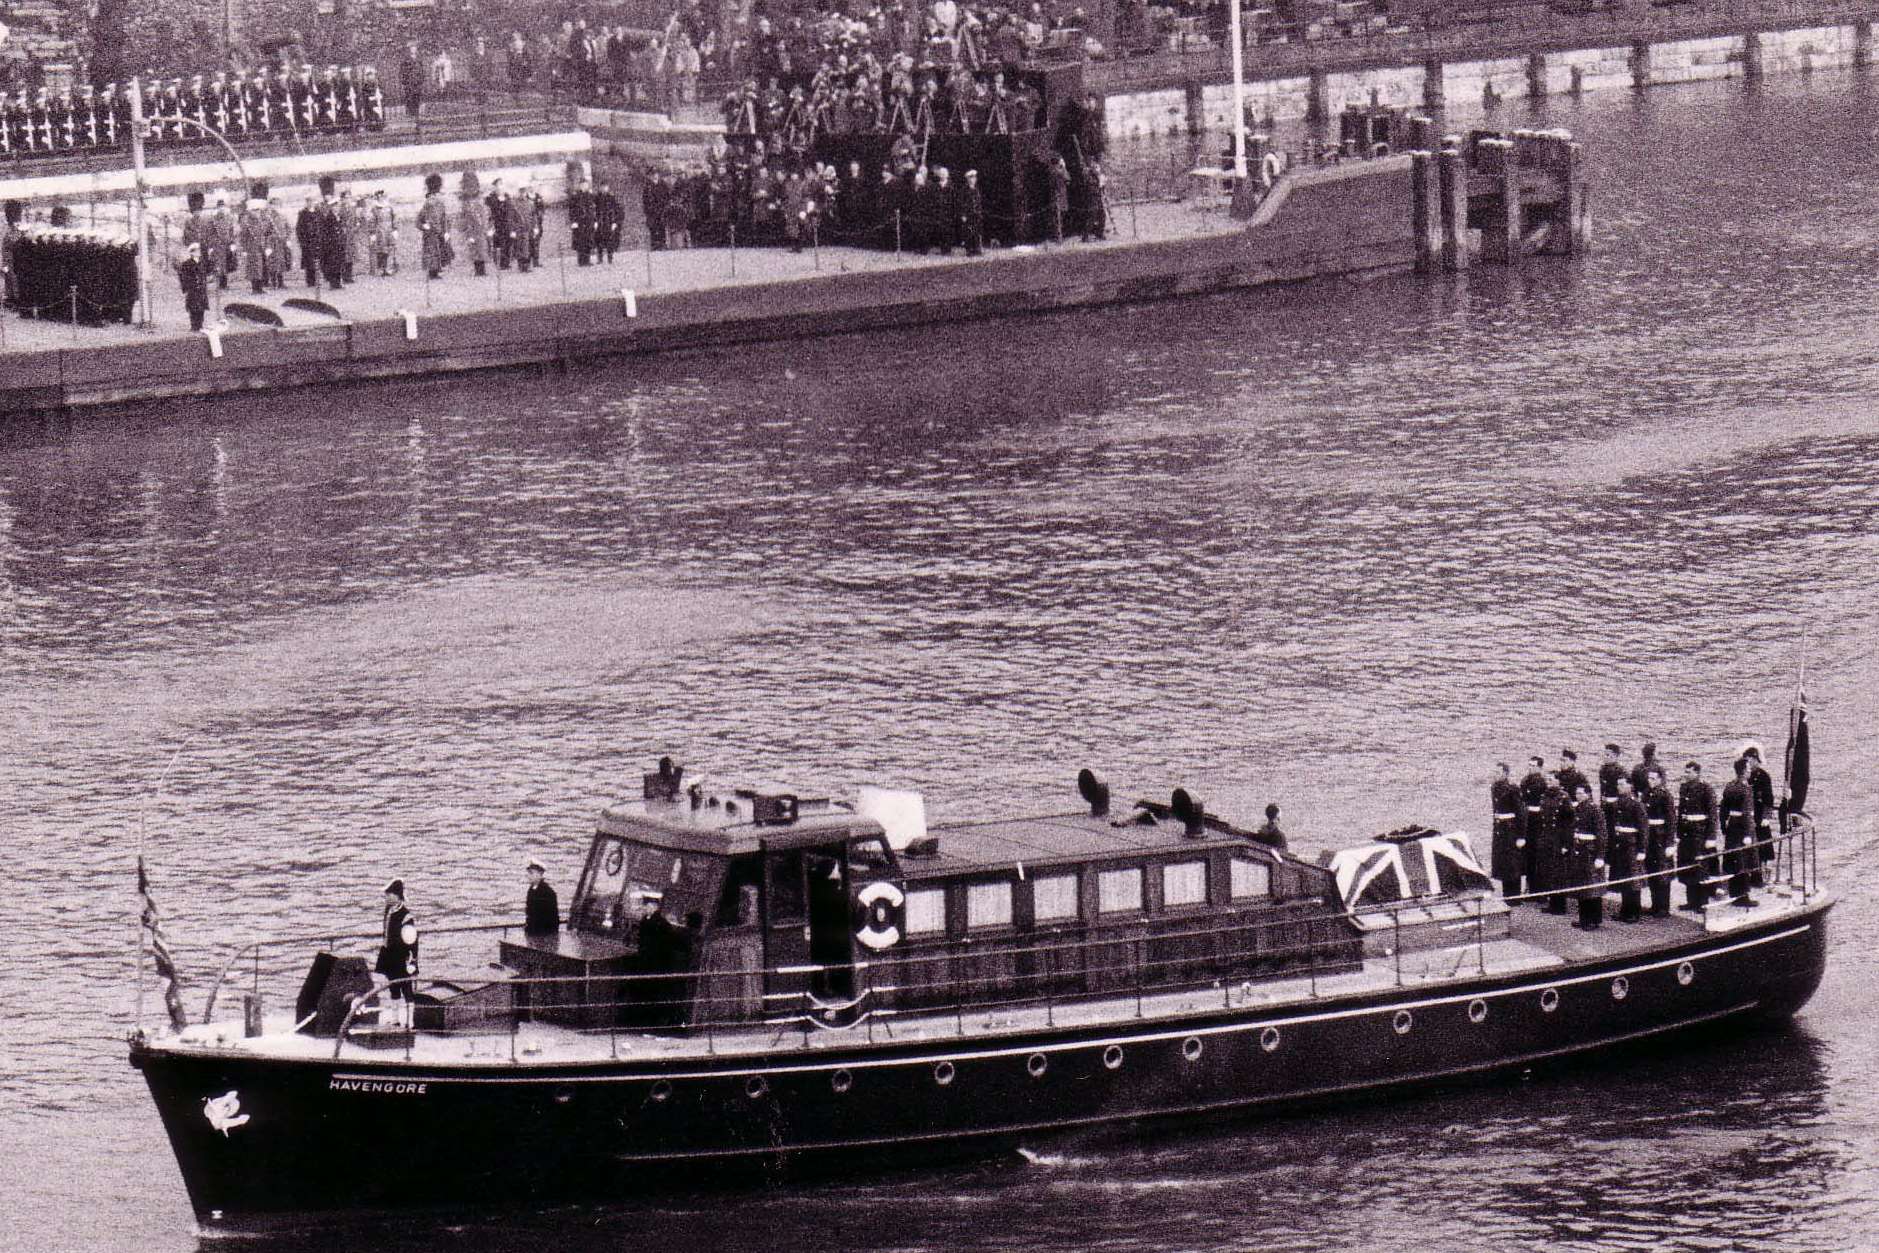 For his final journey, the Havengore carried the coffin of Sir Winston Churchill which was draped with the Union Flag, from Tower Pier to Festival Pier